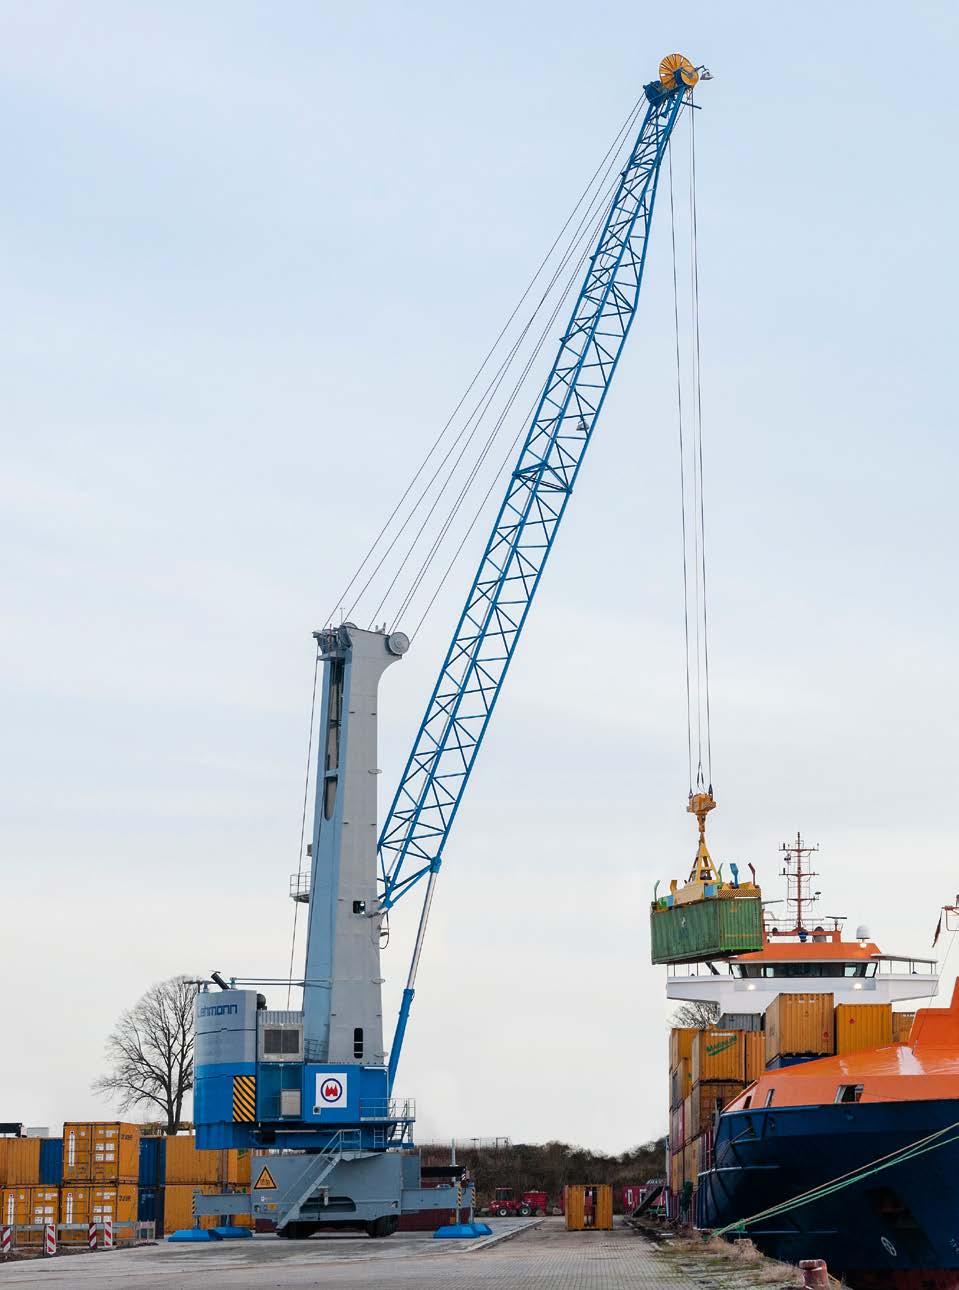 2 3 MODEL 5 MOBILE HARBOR CRANES FUNCTIONAL DESIGN AND POWERFUL PERFORMANCE Gottwald Model 5 Mobile Harbor Canes are very powerful, electrically driven two-rope cranes and are the largest in the